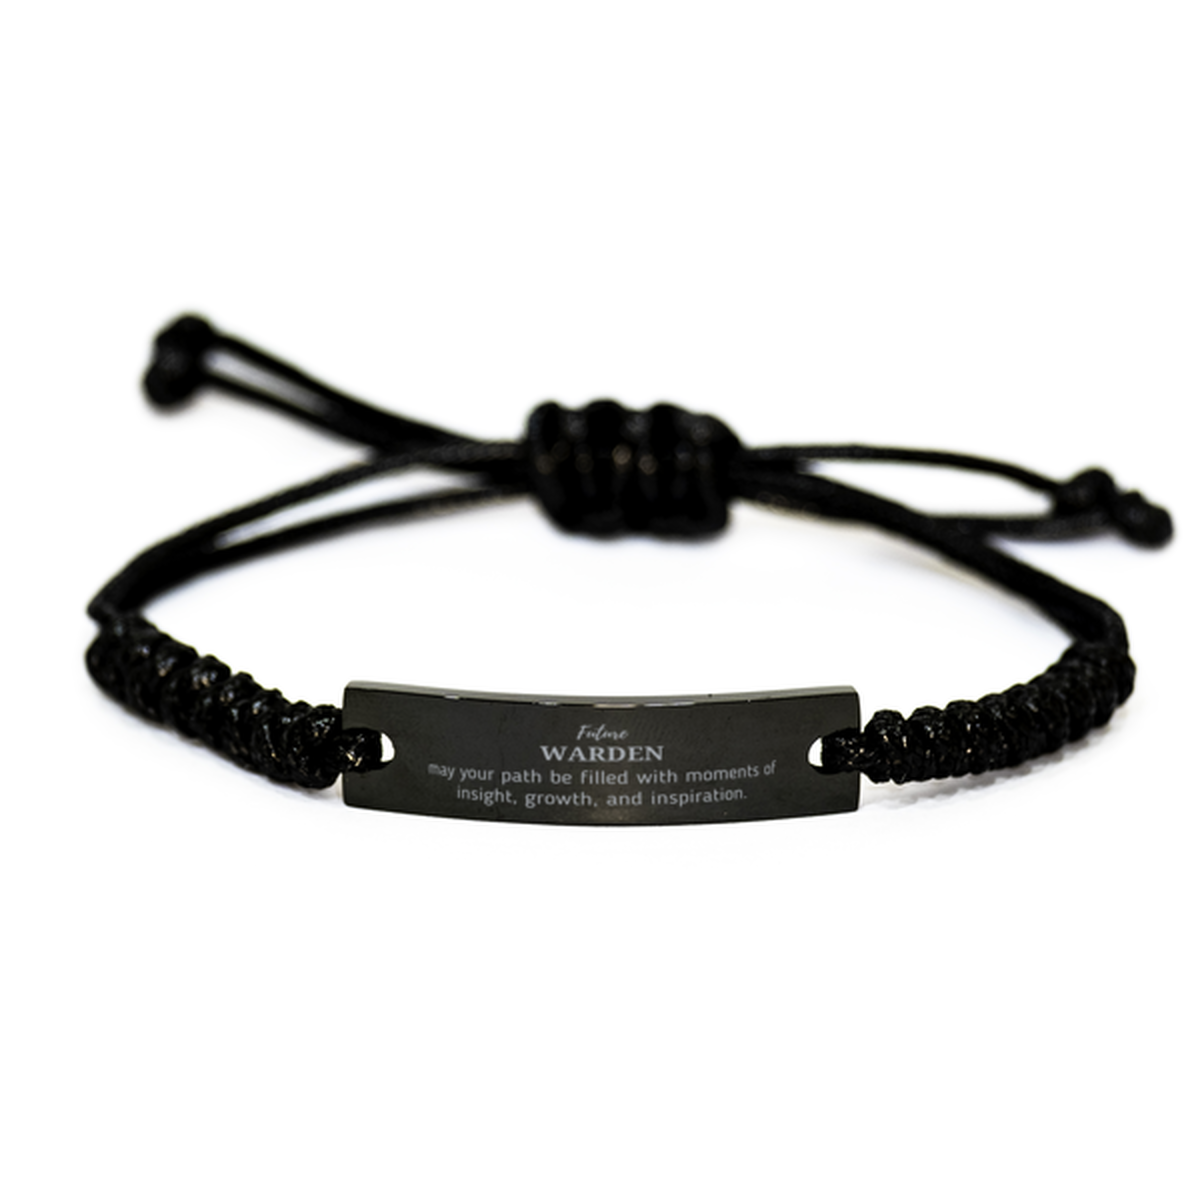 Future Warden Gifts, May your path be filled with moments of insight, Graduation Gifts for New Warden, Christmas Unique Black Rope Bracelet For Men, Women, Friends